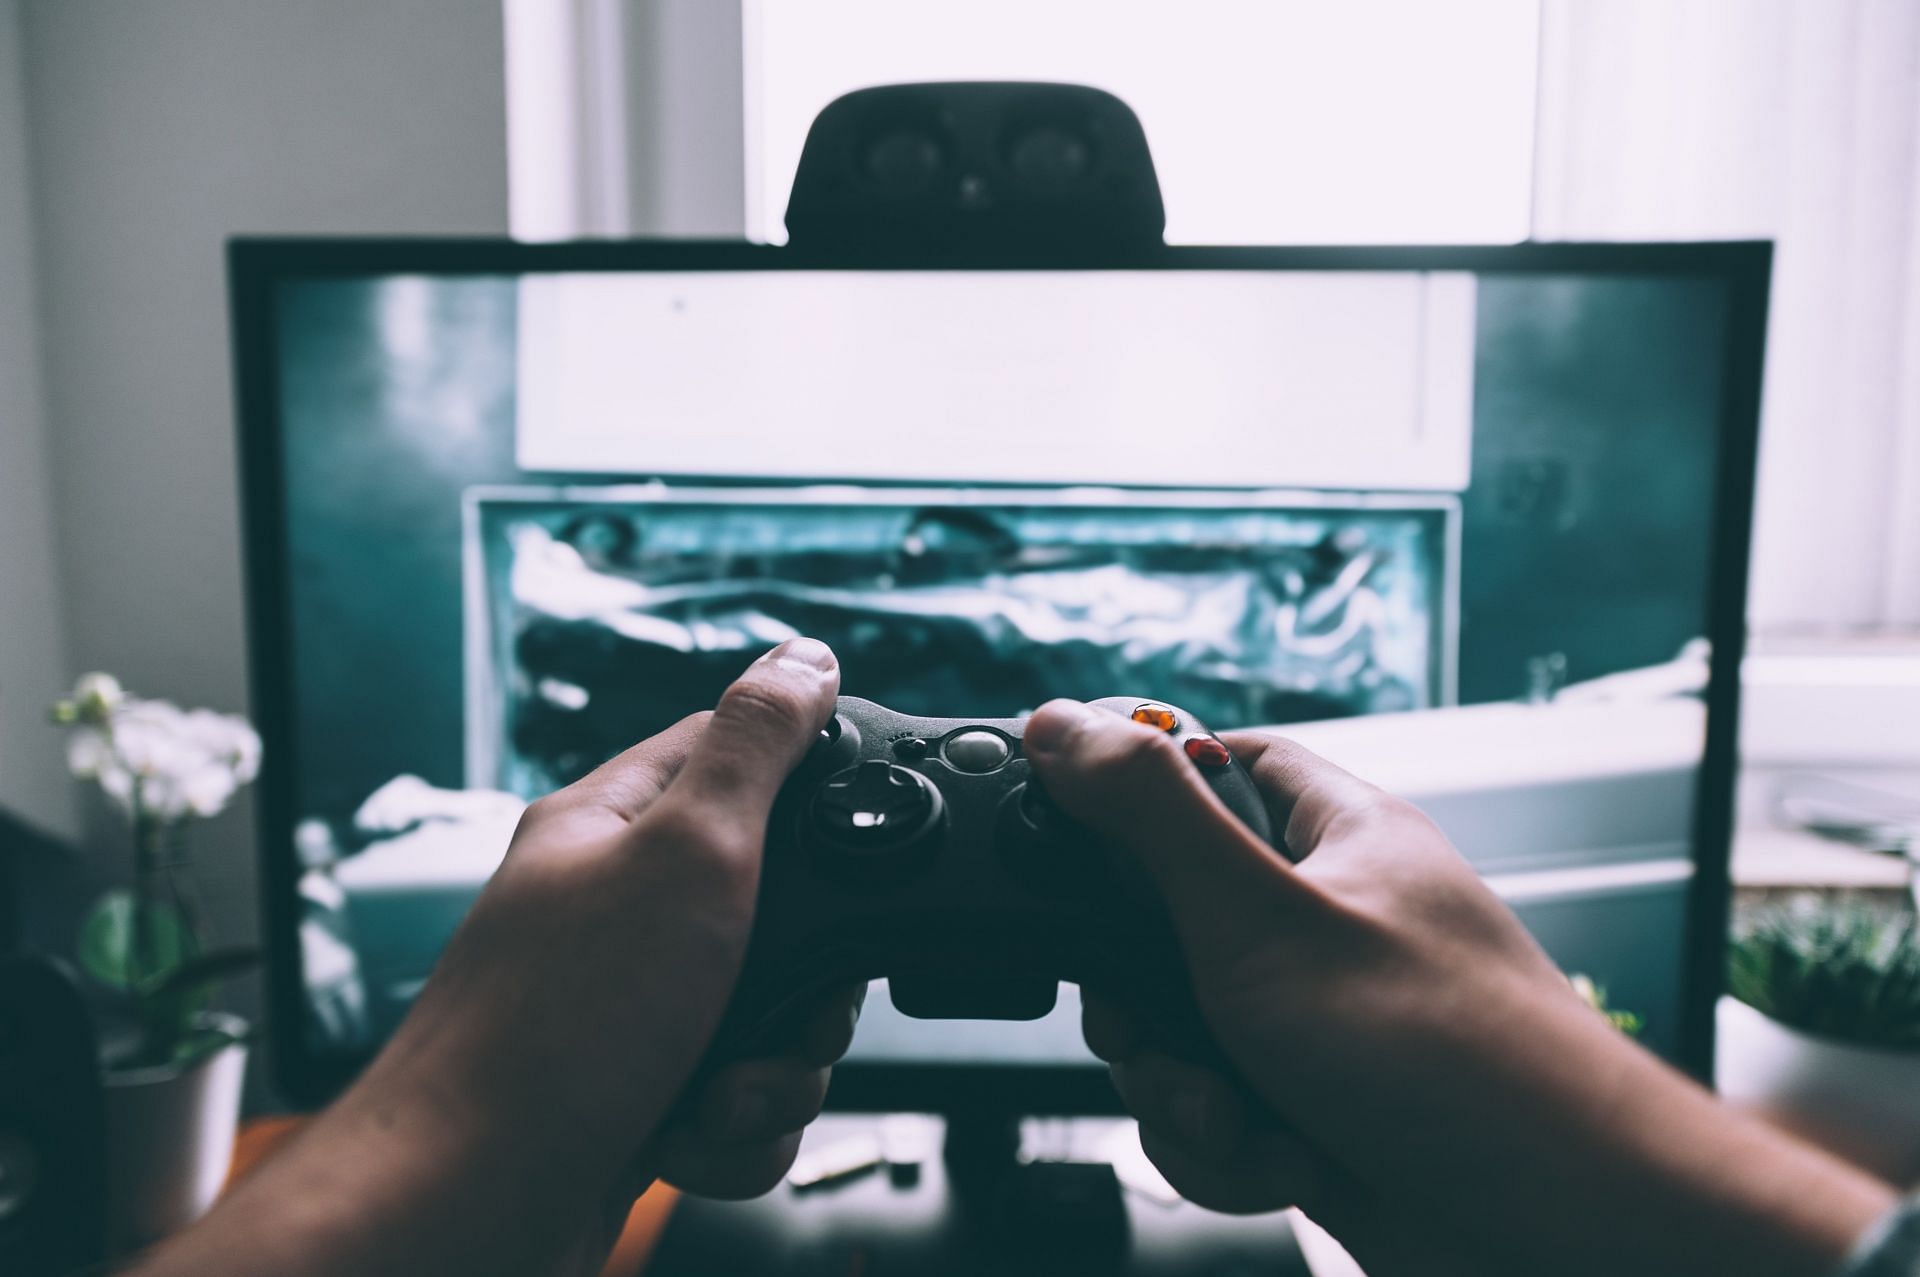 If you are struggling with gaming disorder, this is your cue to pay immediate attention. (Image via Unsplash/ Glenn Carstens)